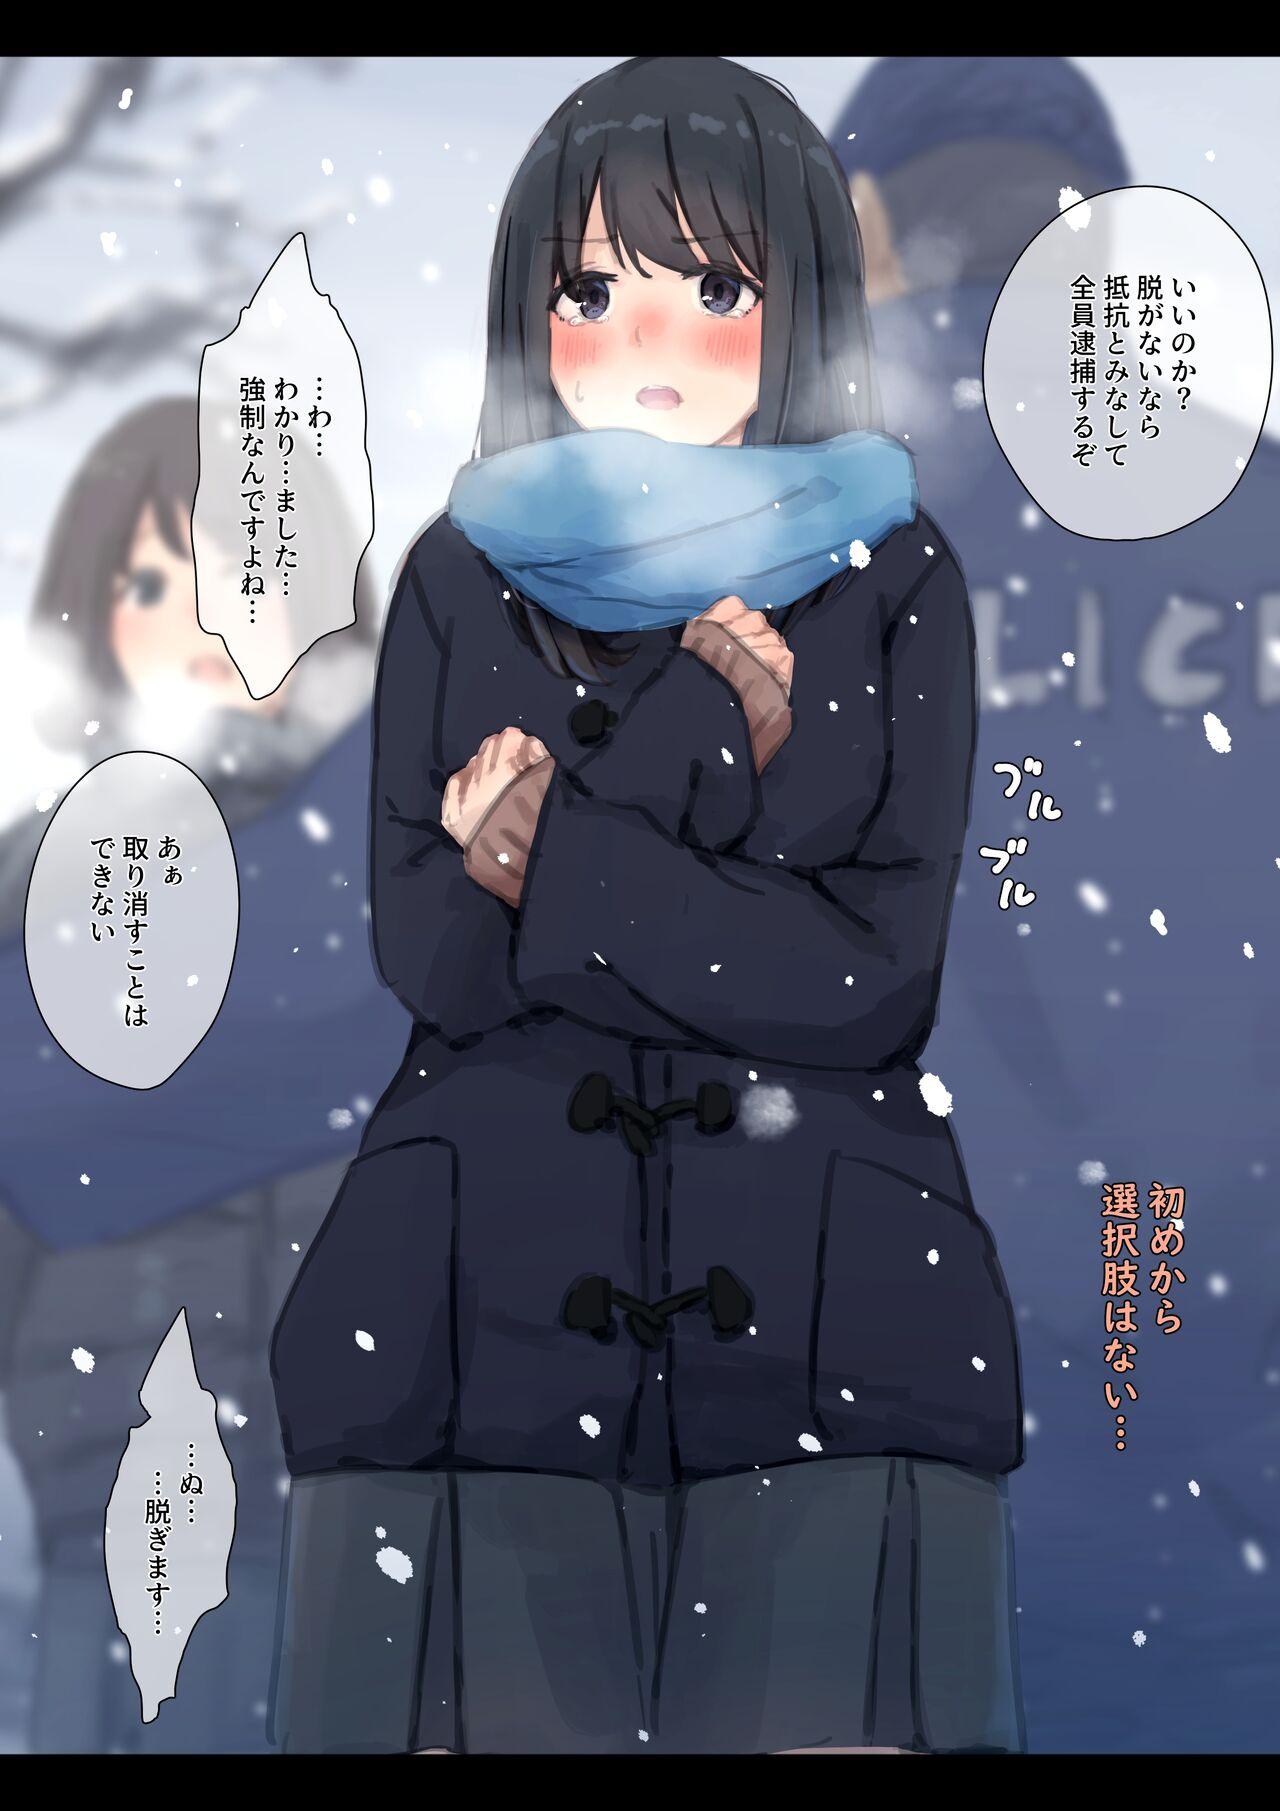 [Yukimuramaru] Public property Sex Slave Girl - Ex - Collection in the Snow - [Digital] [Ongoing] 21